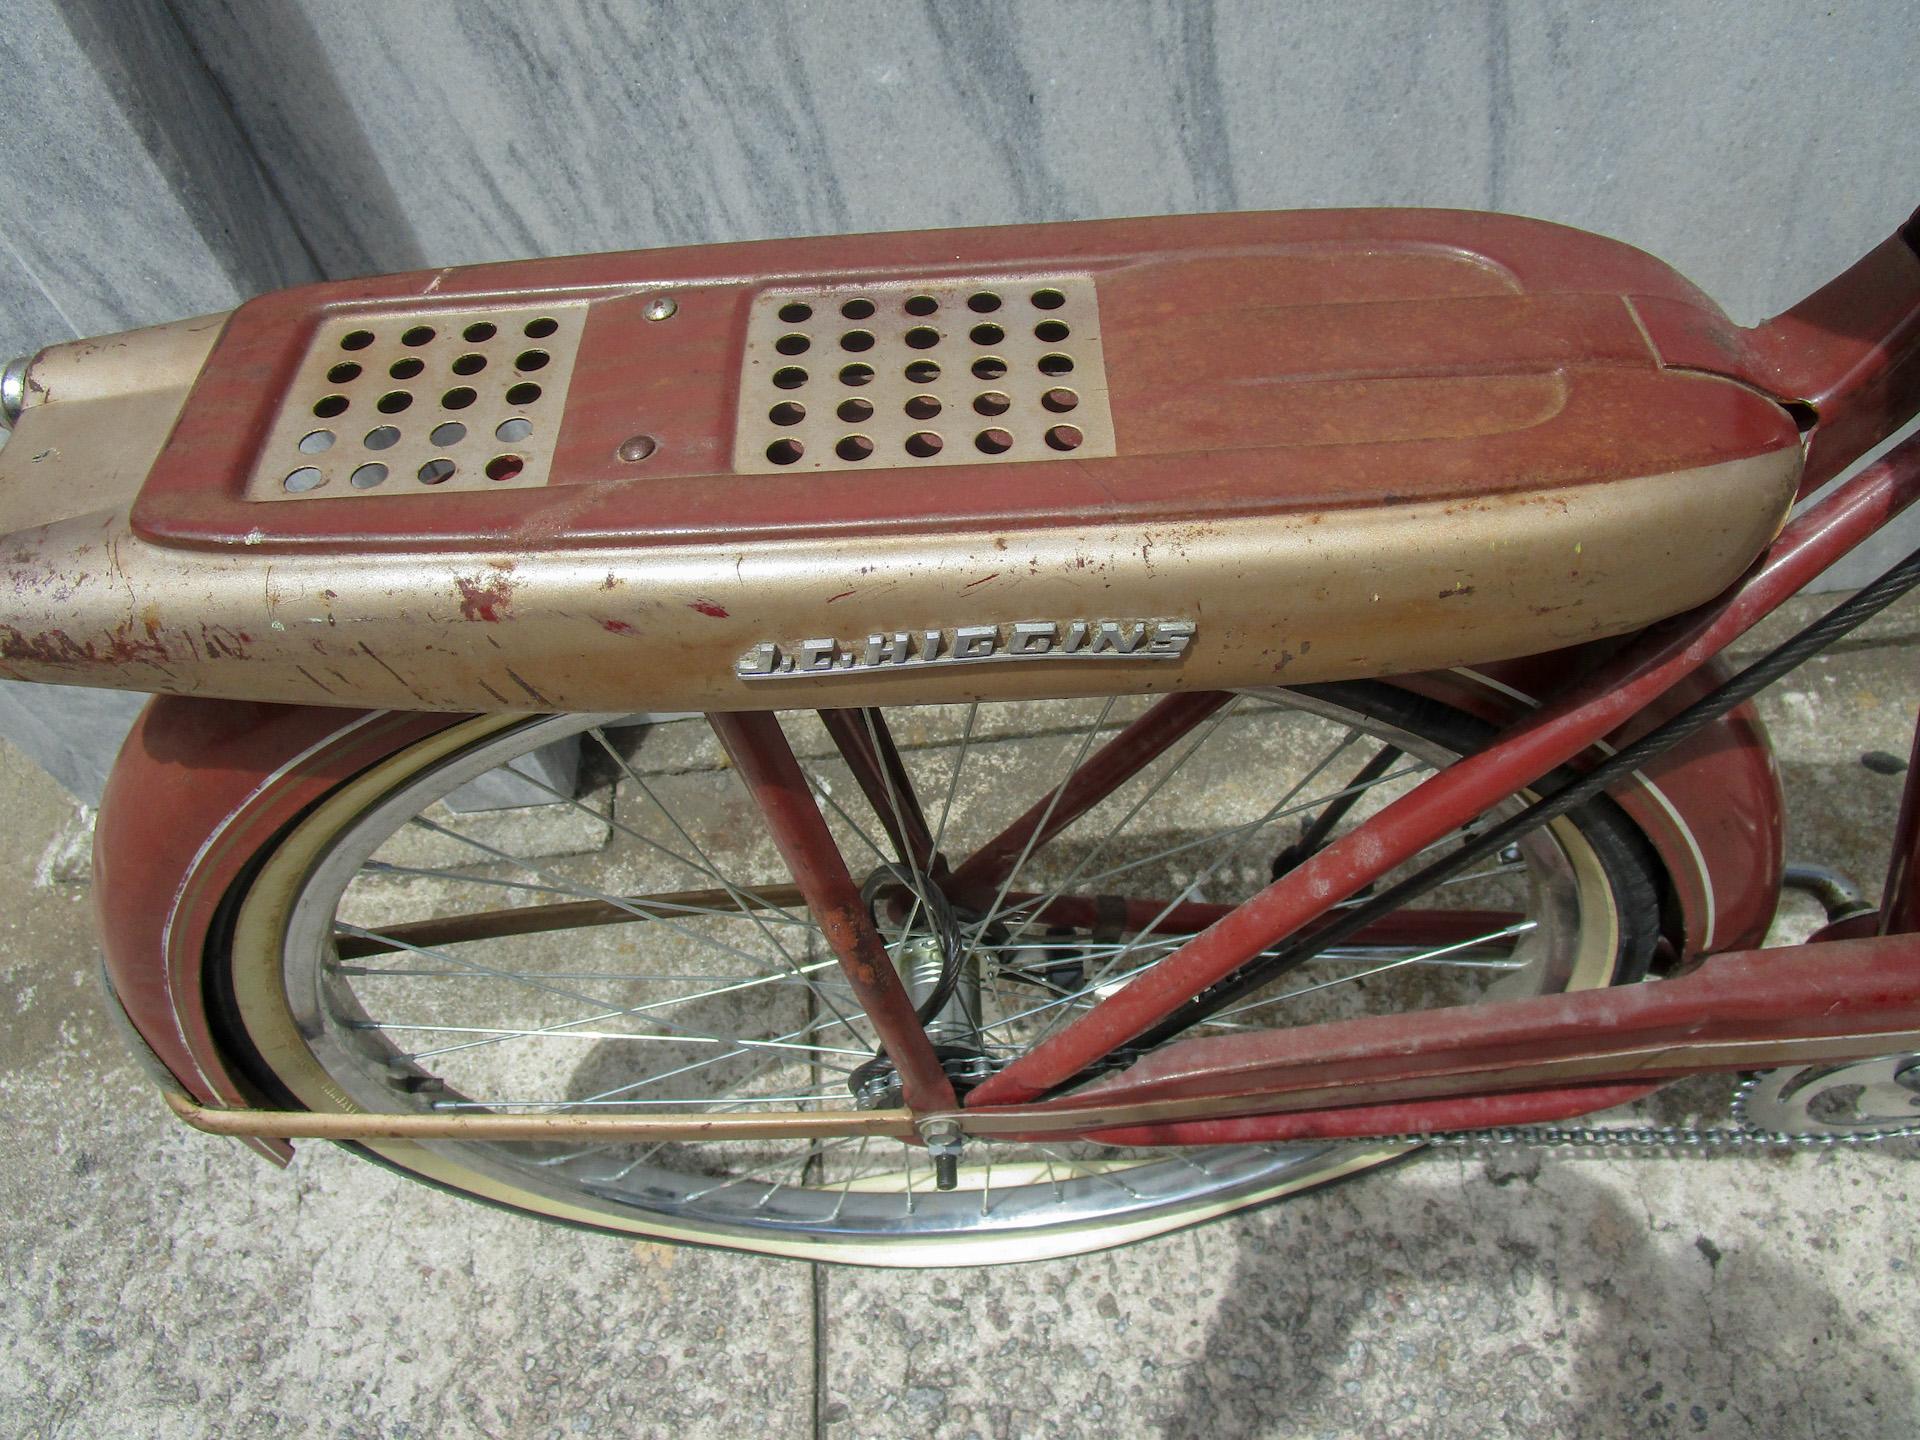 One of the coolest vintage bicycles in original condition, this 